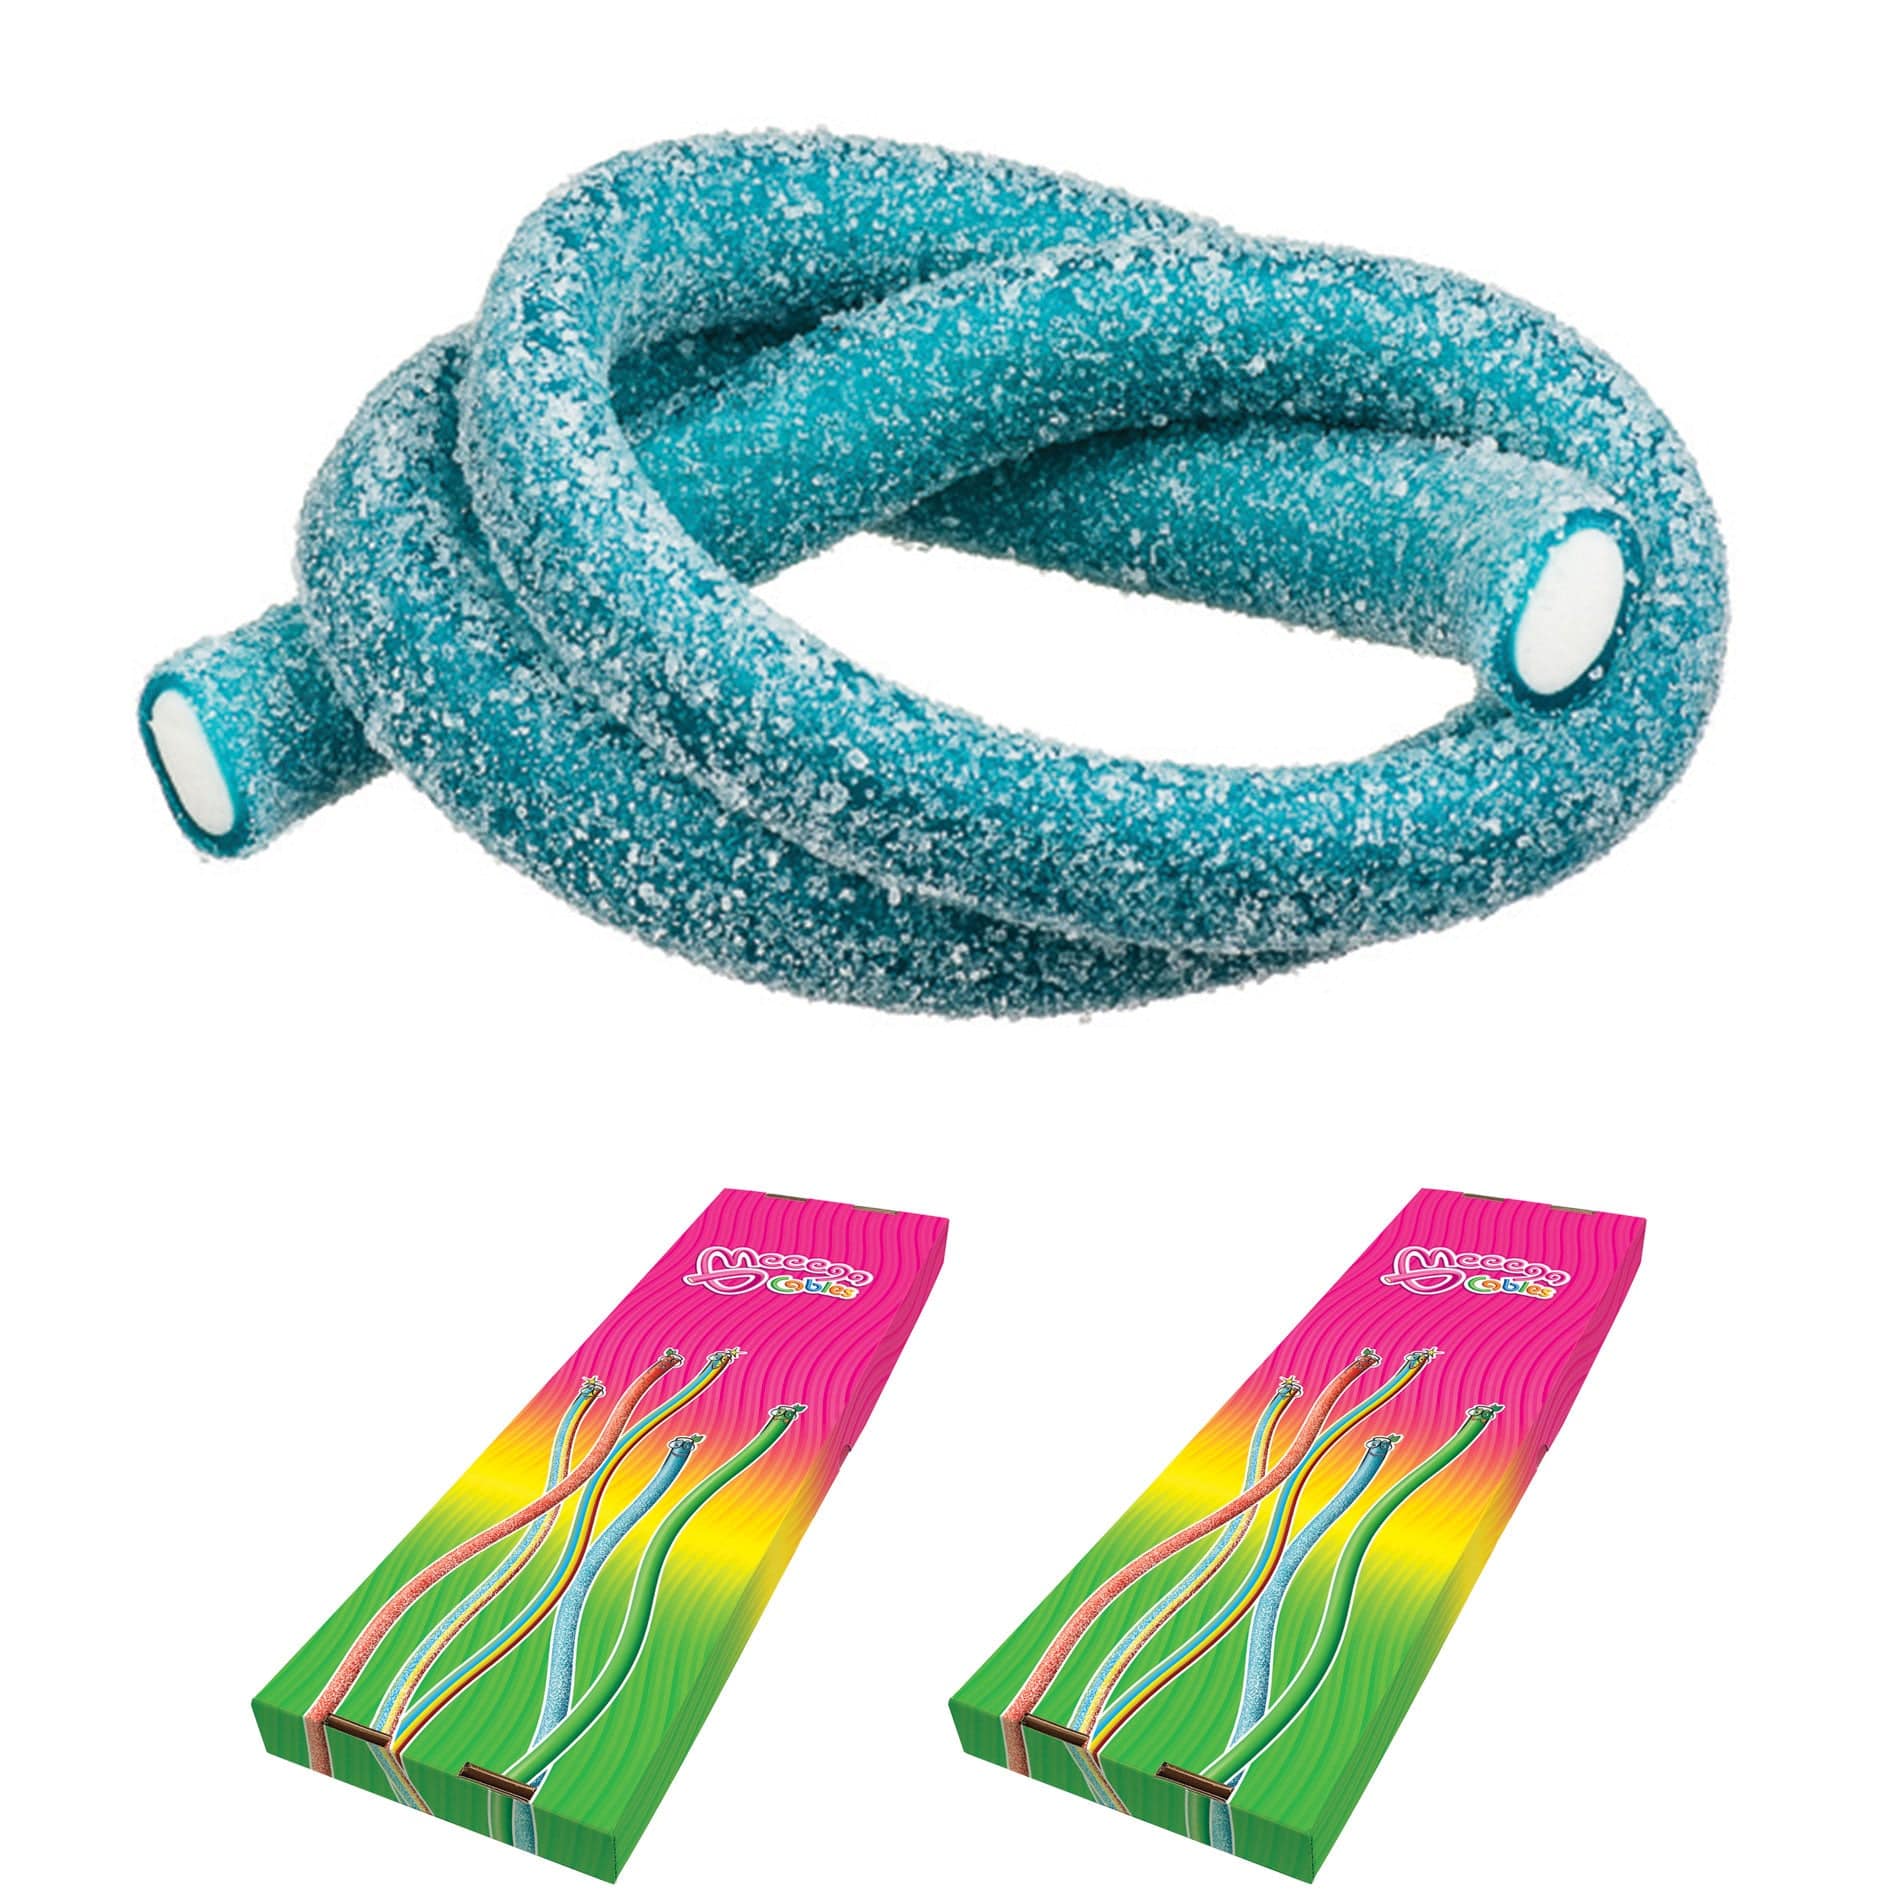 Novelty Concessions Gummy Rope SOUR BLUEBERRY / 2 Pack (60 pieces) Meeega Cables European Chewy Rope Candy - Box of 30 individually wrapped Meeega Cables, each over 2-feet long cups with lids and straws